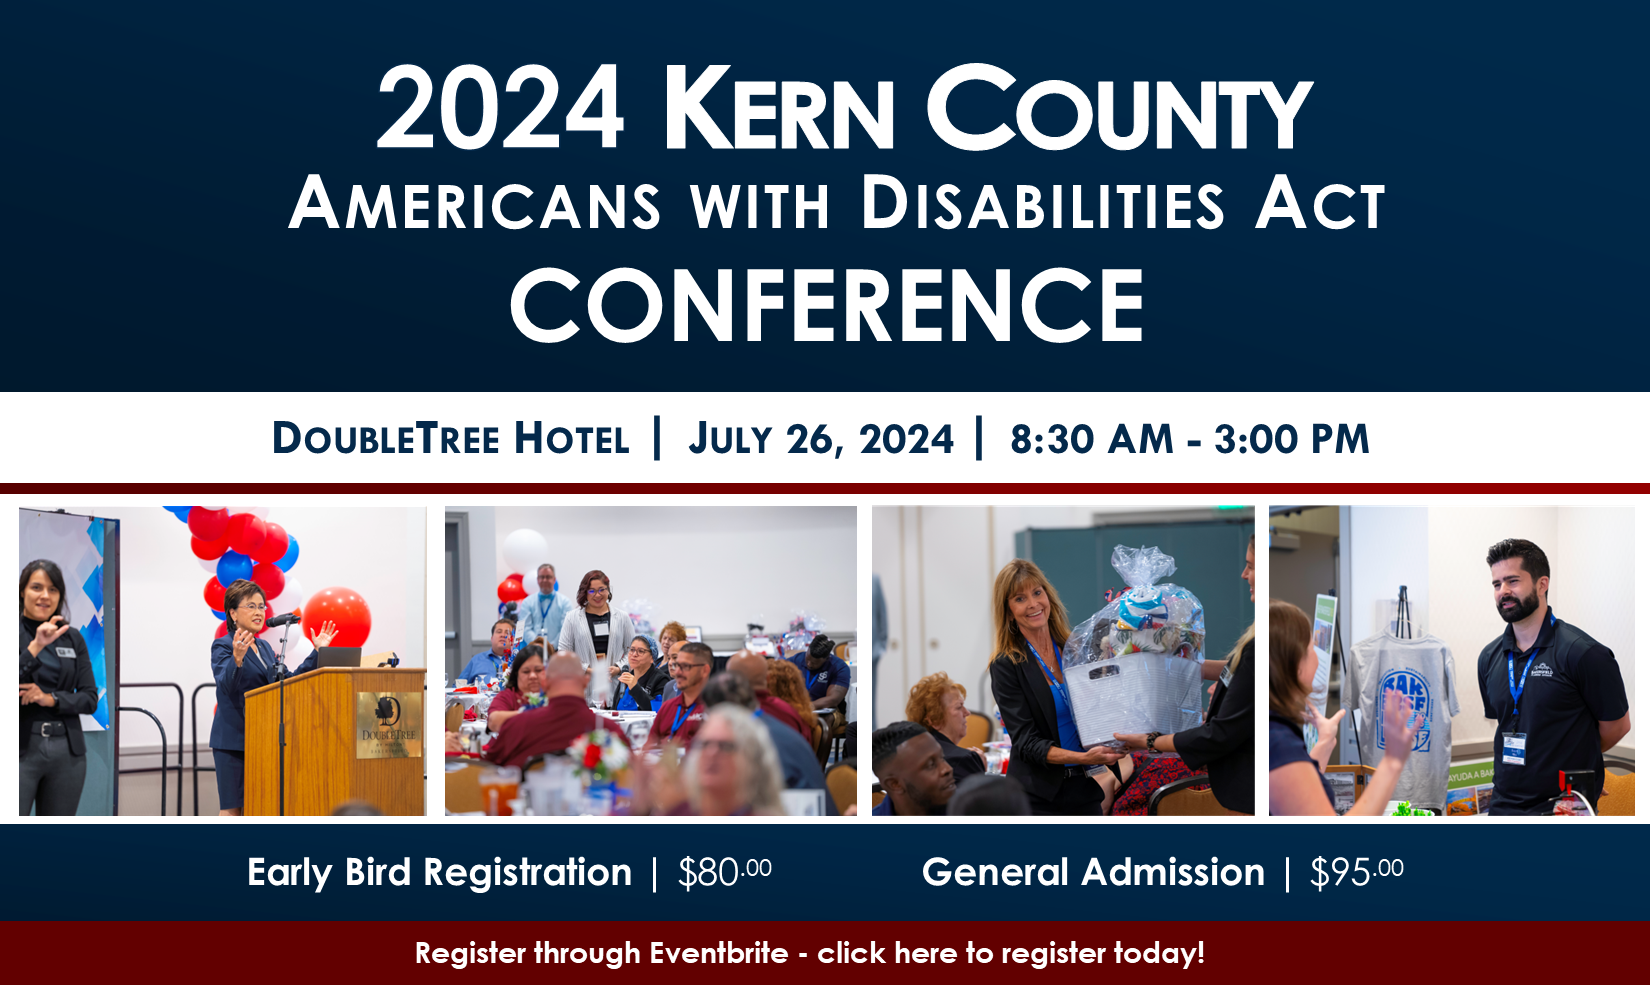 2024 Kern County American with Disabilities Act Conference | DoubleTree Hotel | July 26, 2024 | 8:30 AM - 3:00 PM | Early Bird Registration $80.00 | General Admission $95.00 | Register through Eventbrite - click here to register today!